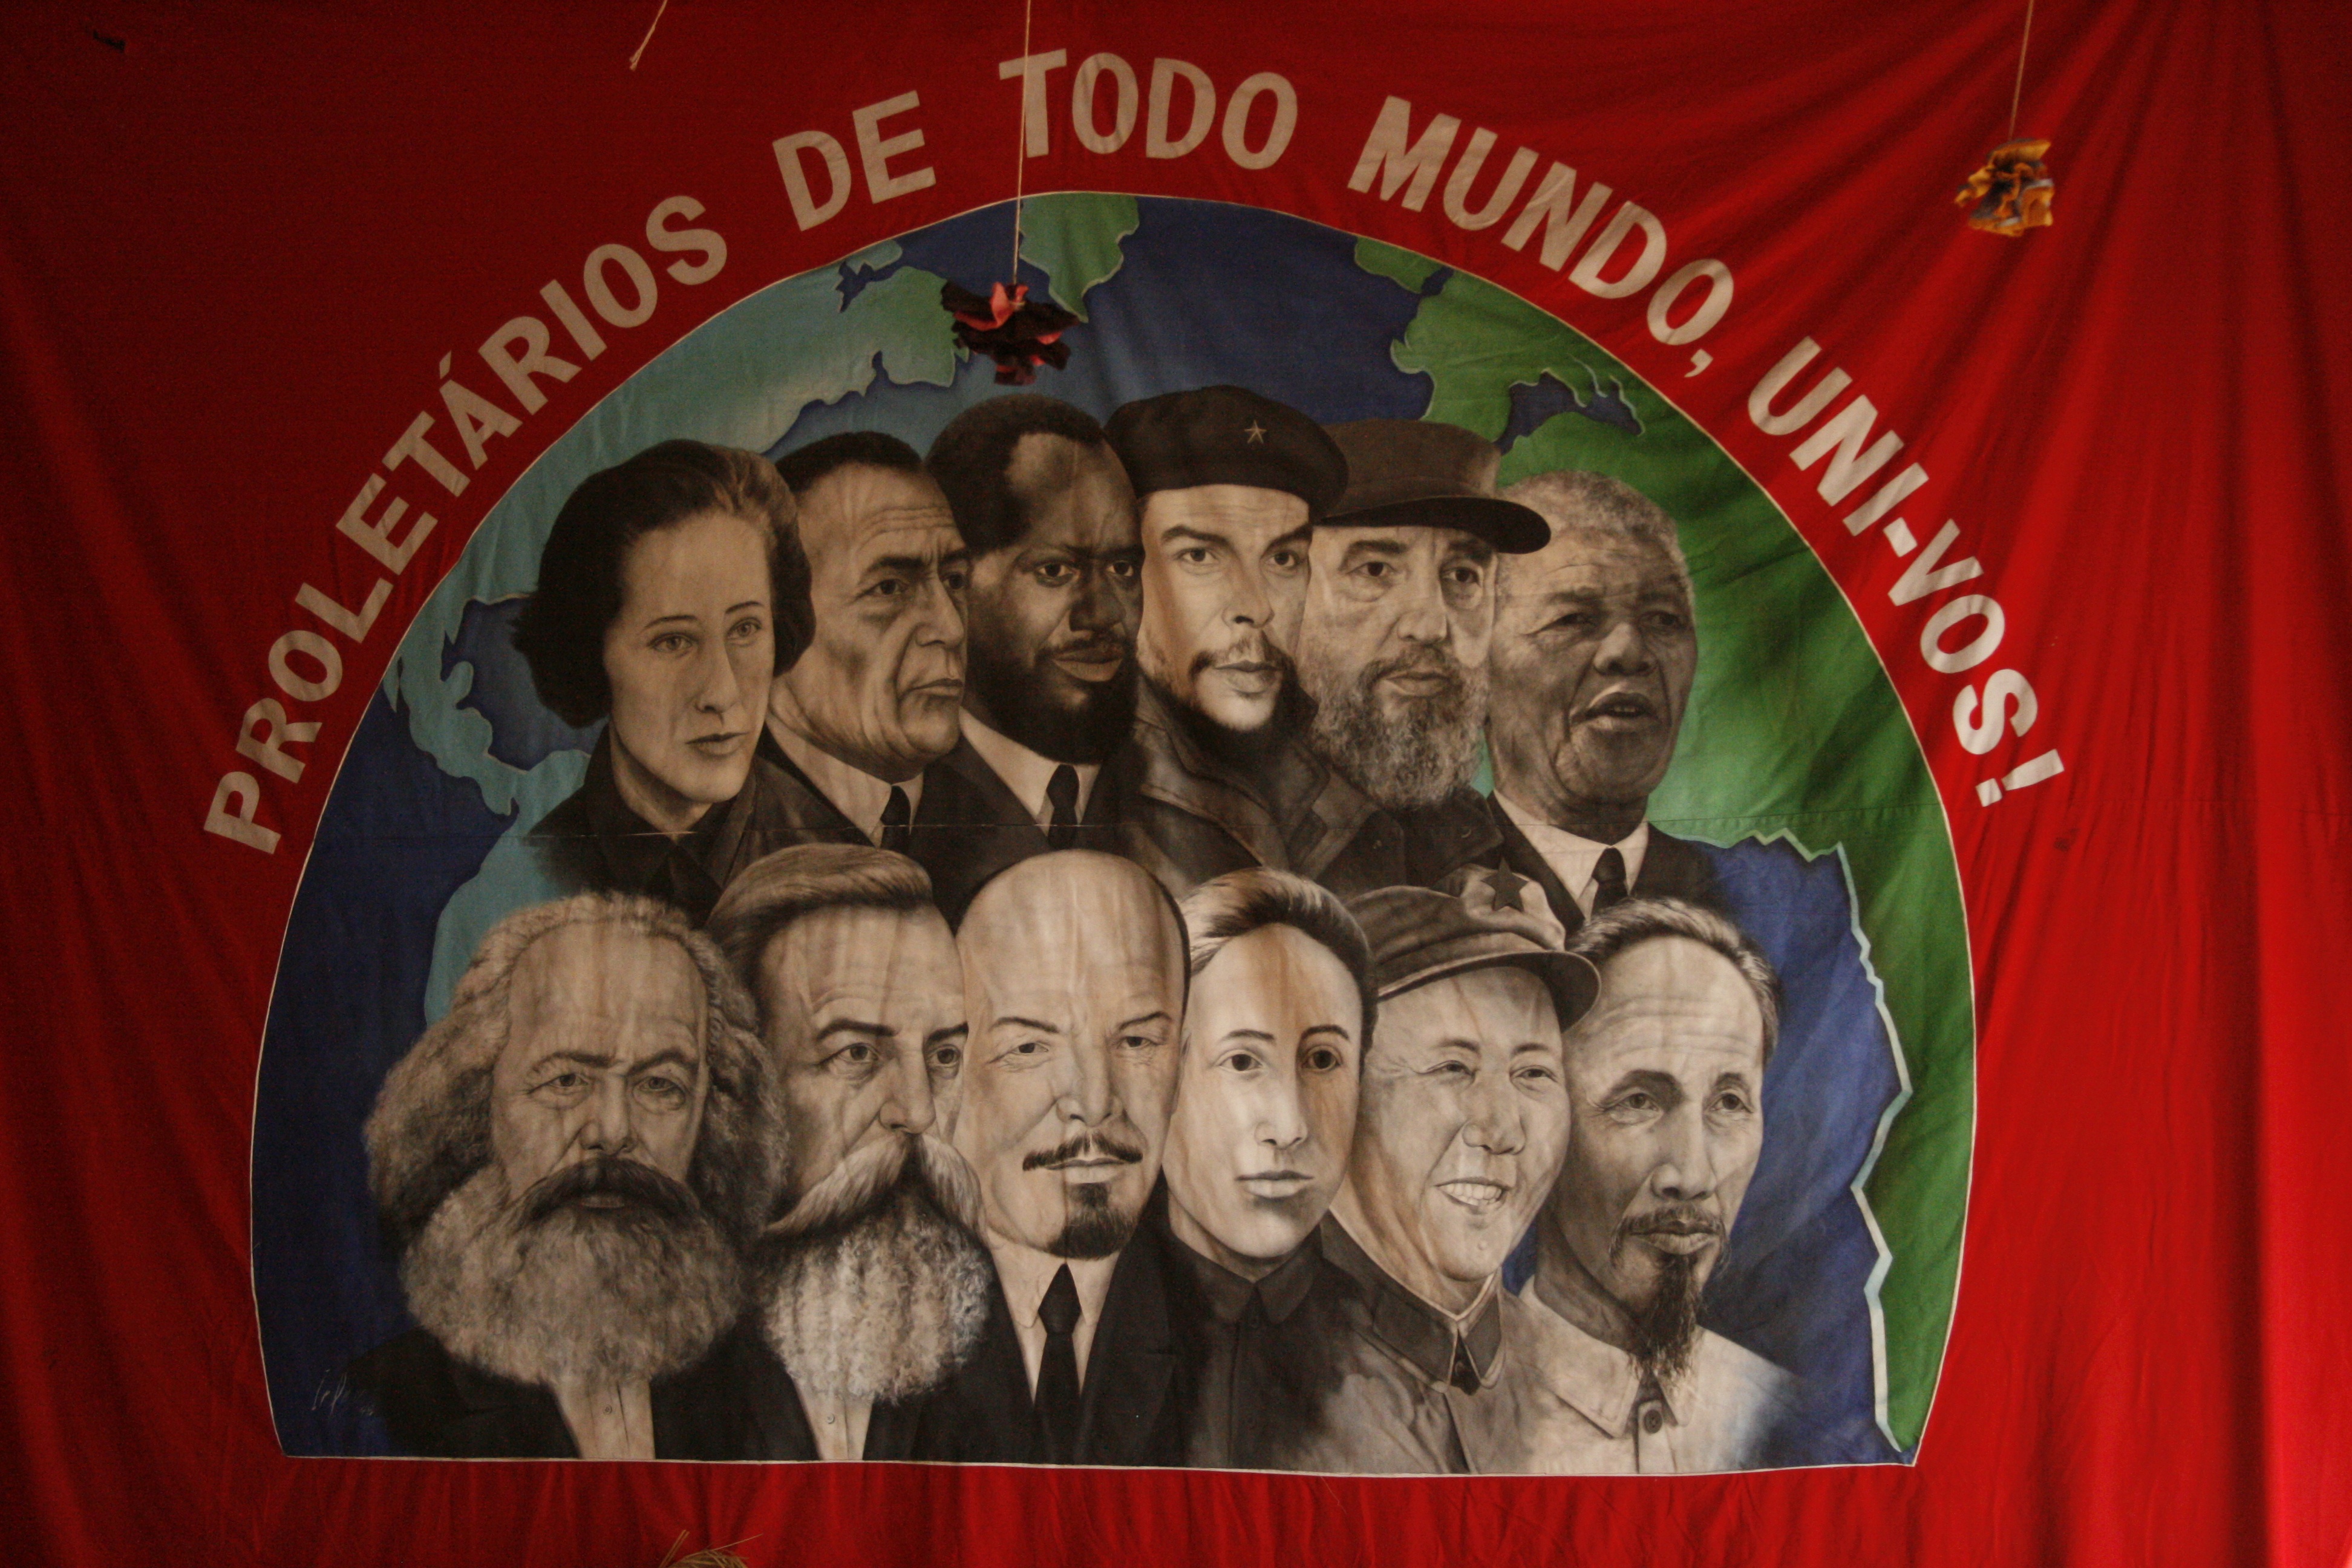 Landless Rural Workers Movement (MST), Brazil – Participedia